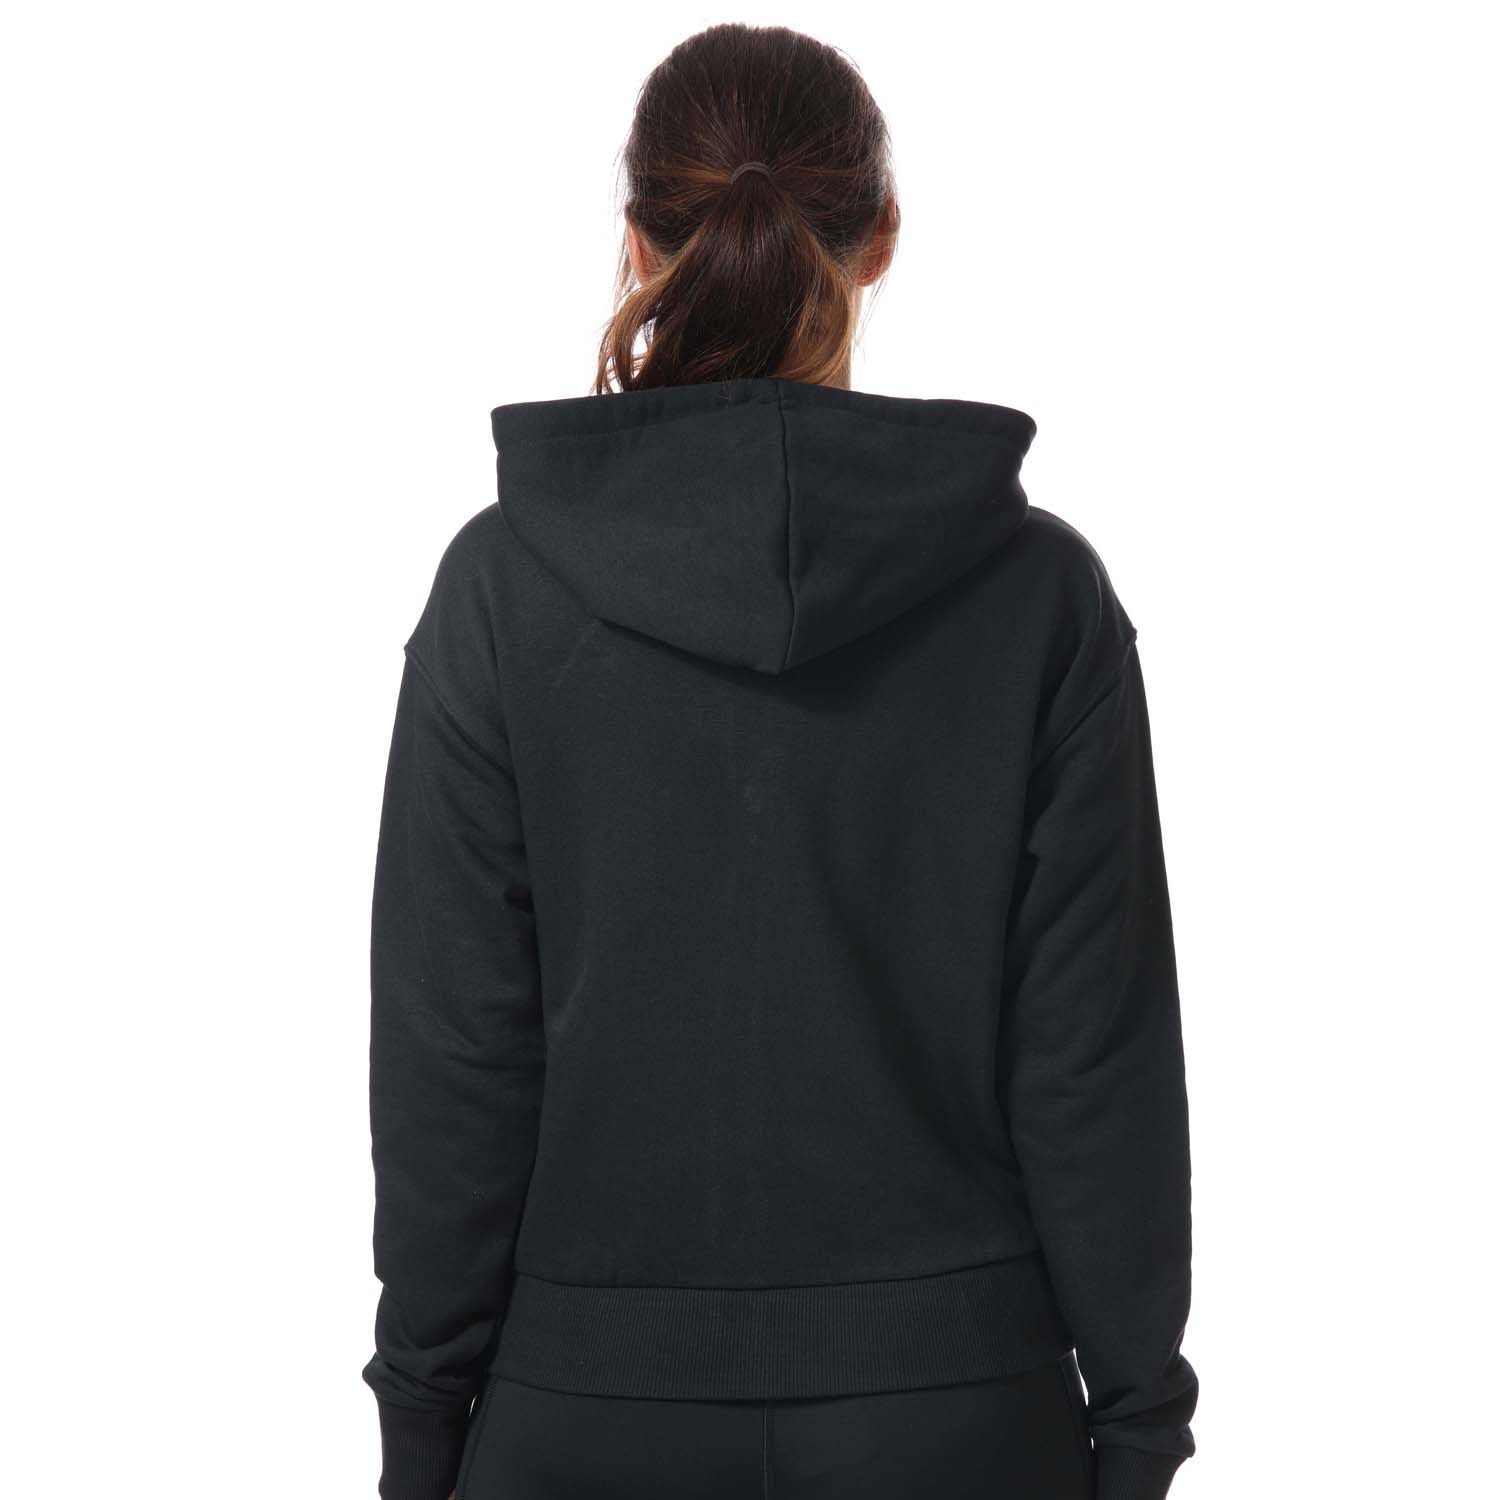 Womens Reebok Identity Zip- Up Track Top in black.- Drawcord-adjustable hood.- Long sleeves with ribbed cuffs.- Full zip fastening.- Kangaroo pocket.- Ribbed hem.- Small logo.- Oversize fit.- Main Material: 80% Cotton  20% Polyester (Recycled). Rib Part: 95% Cotton  5% Elastane. - Ref:GL2561